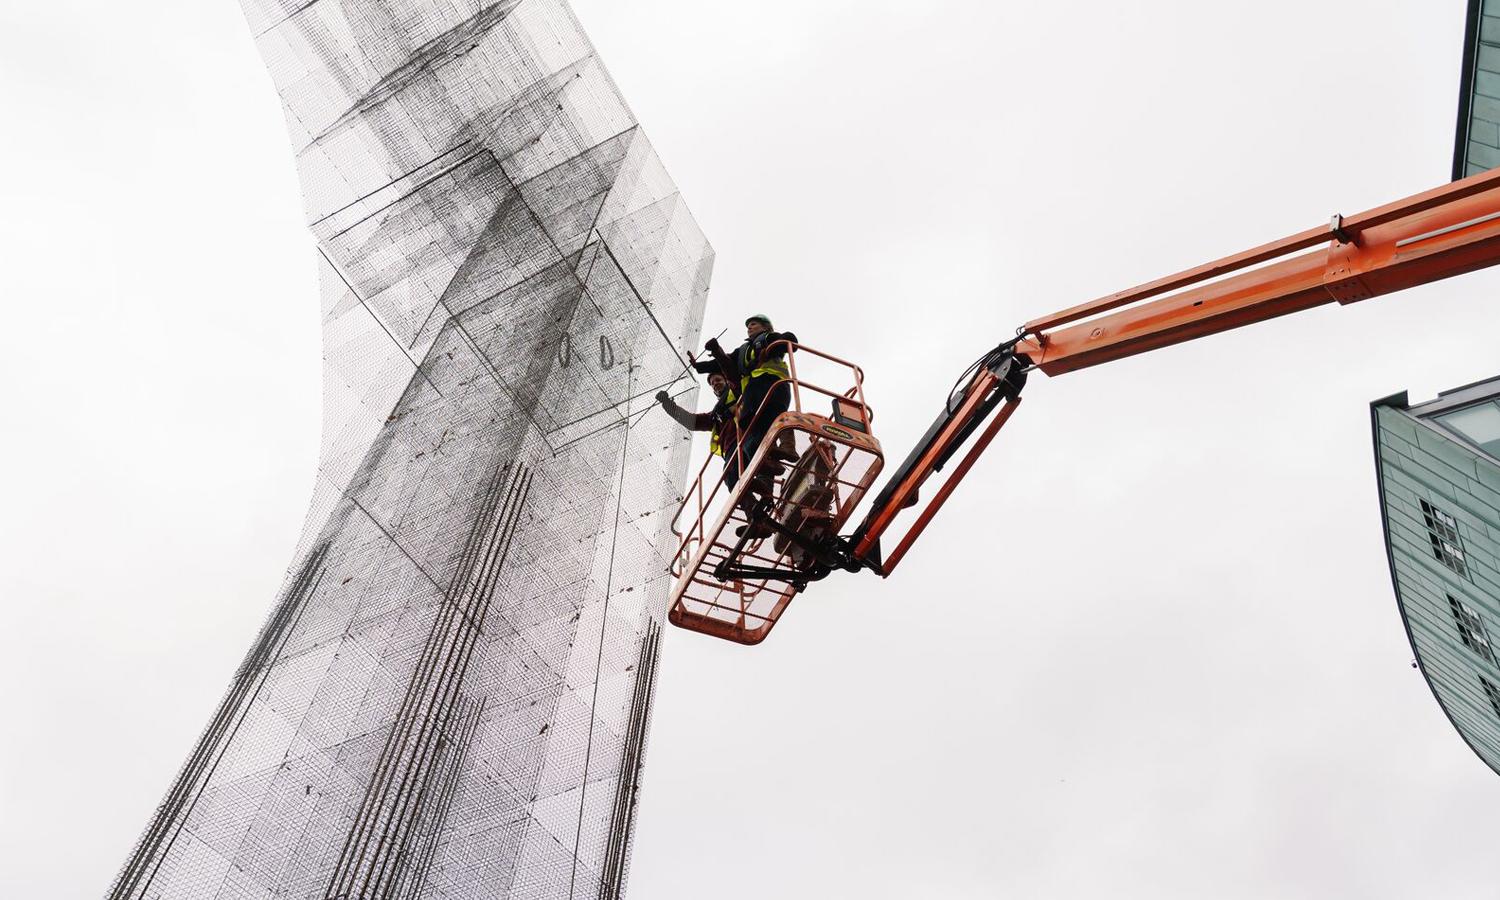 The build-up of a 13m tall artwork from a cherrypicker. 